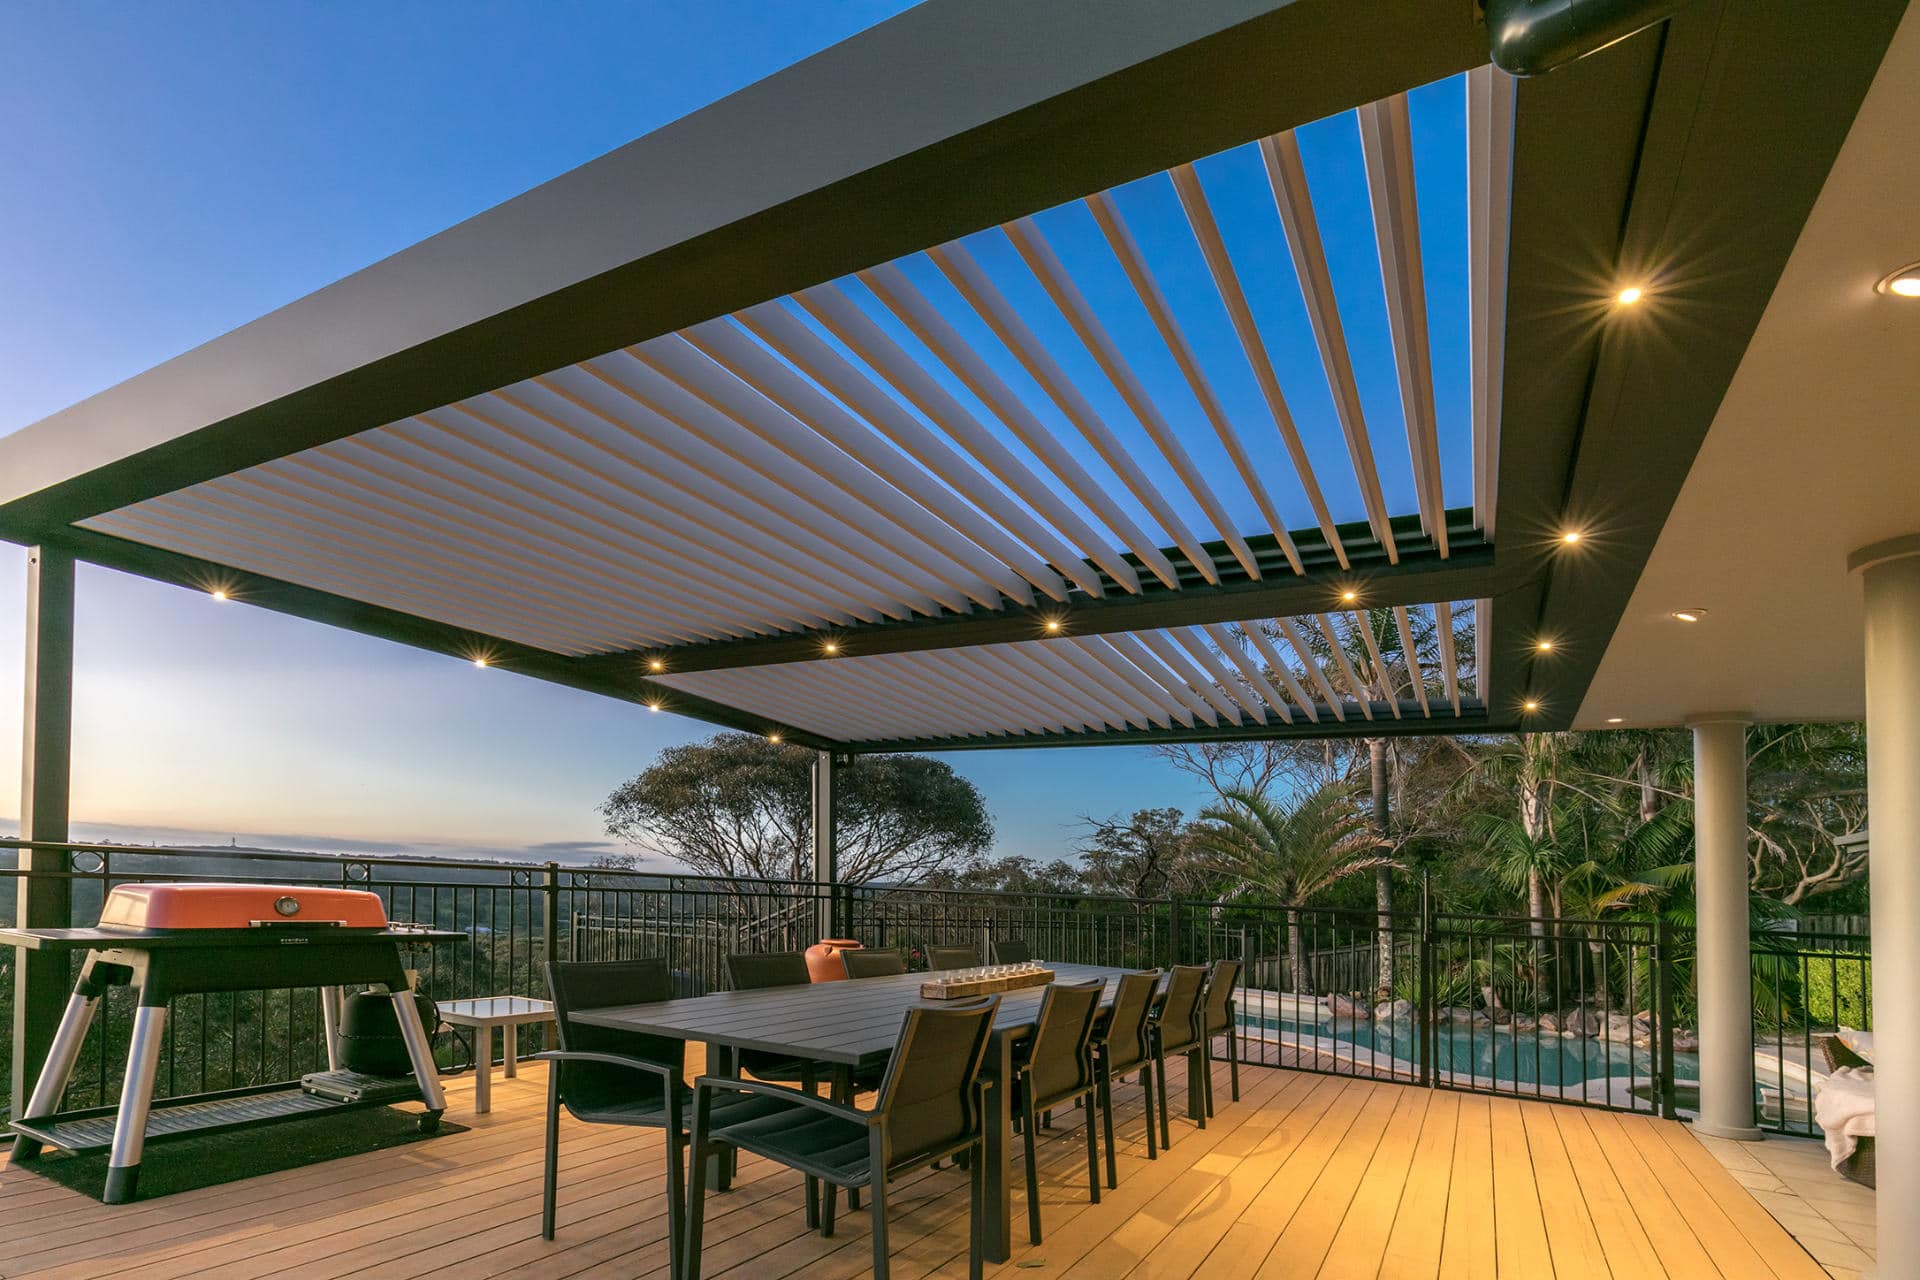 A Beacon Hill home with a new opening roof pergola showcasing its LED lights